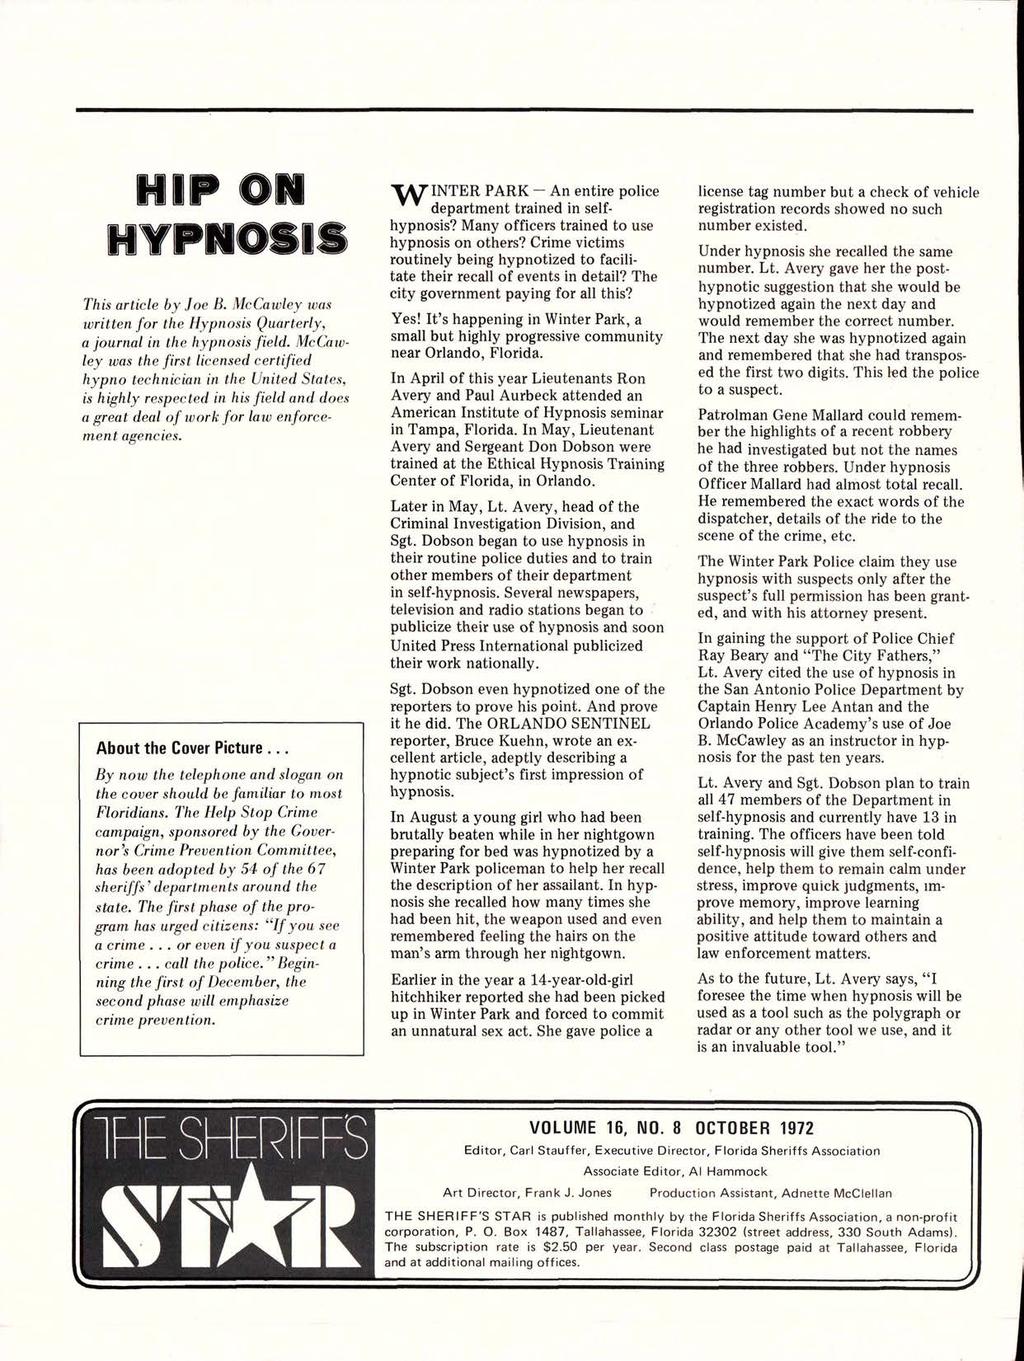 NIP OII IIVPNOSIS This article by Joe B. McCawley was written for the Hypnosis Quarterly, a journal in the hypnosis field.